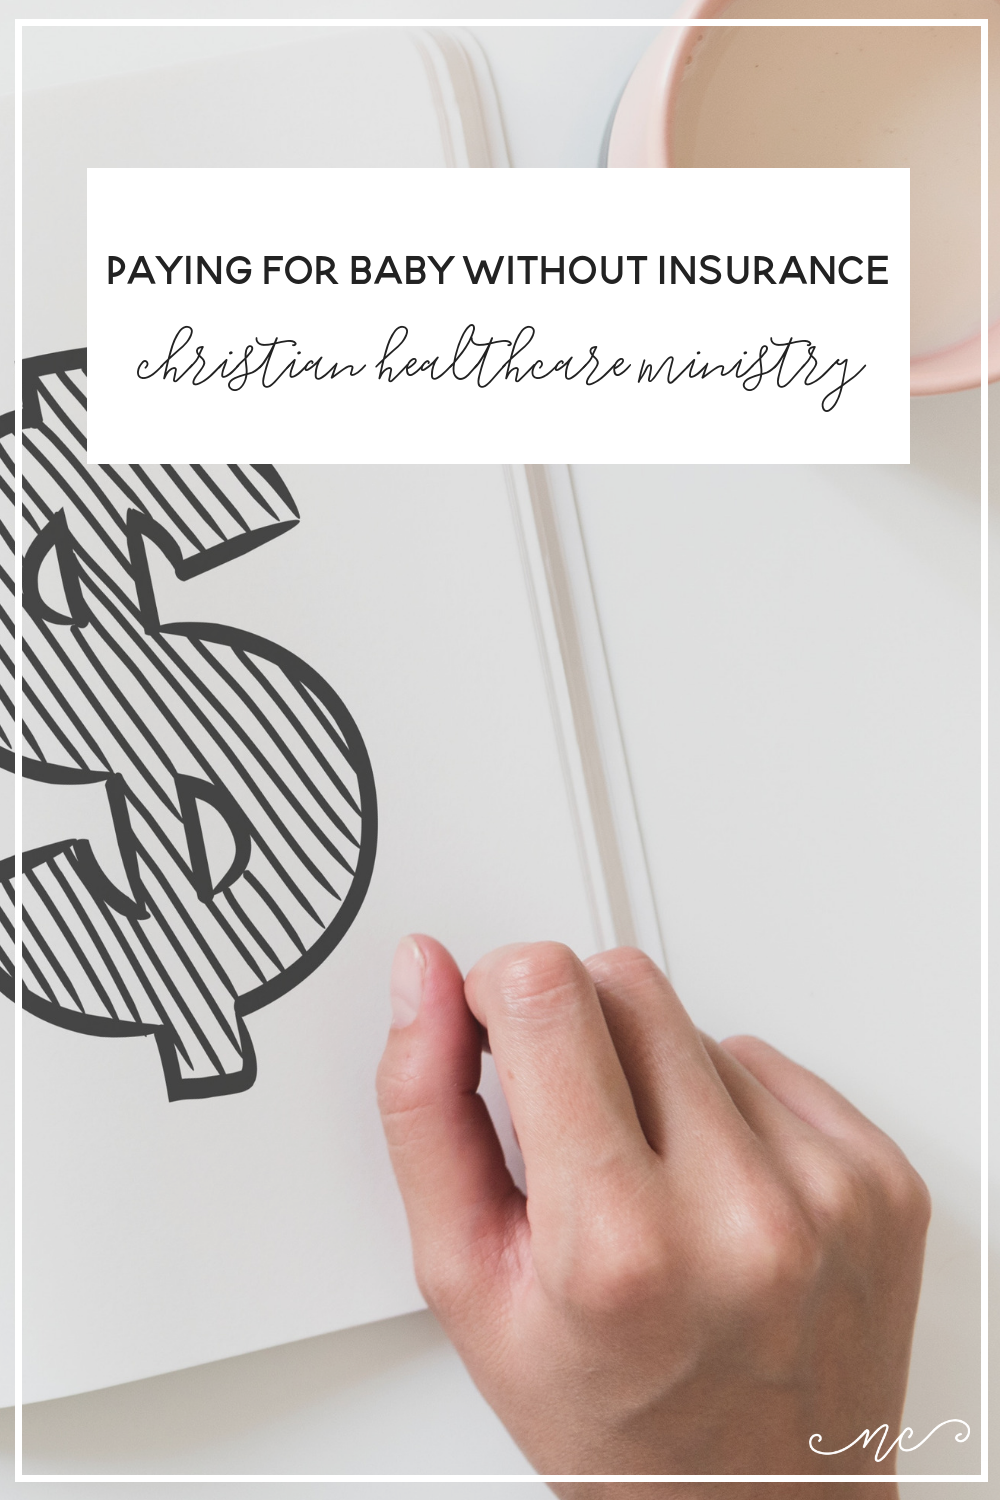 Paying for a Baby Without Insurance - Christian Healthcare Ministries Review